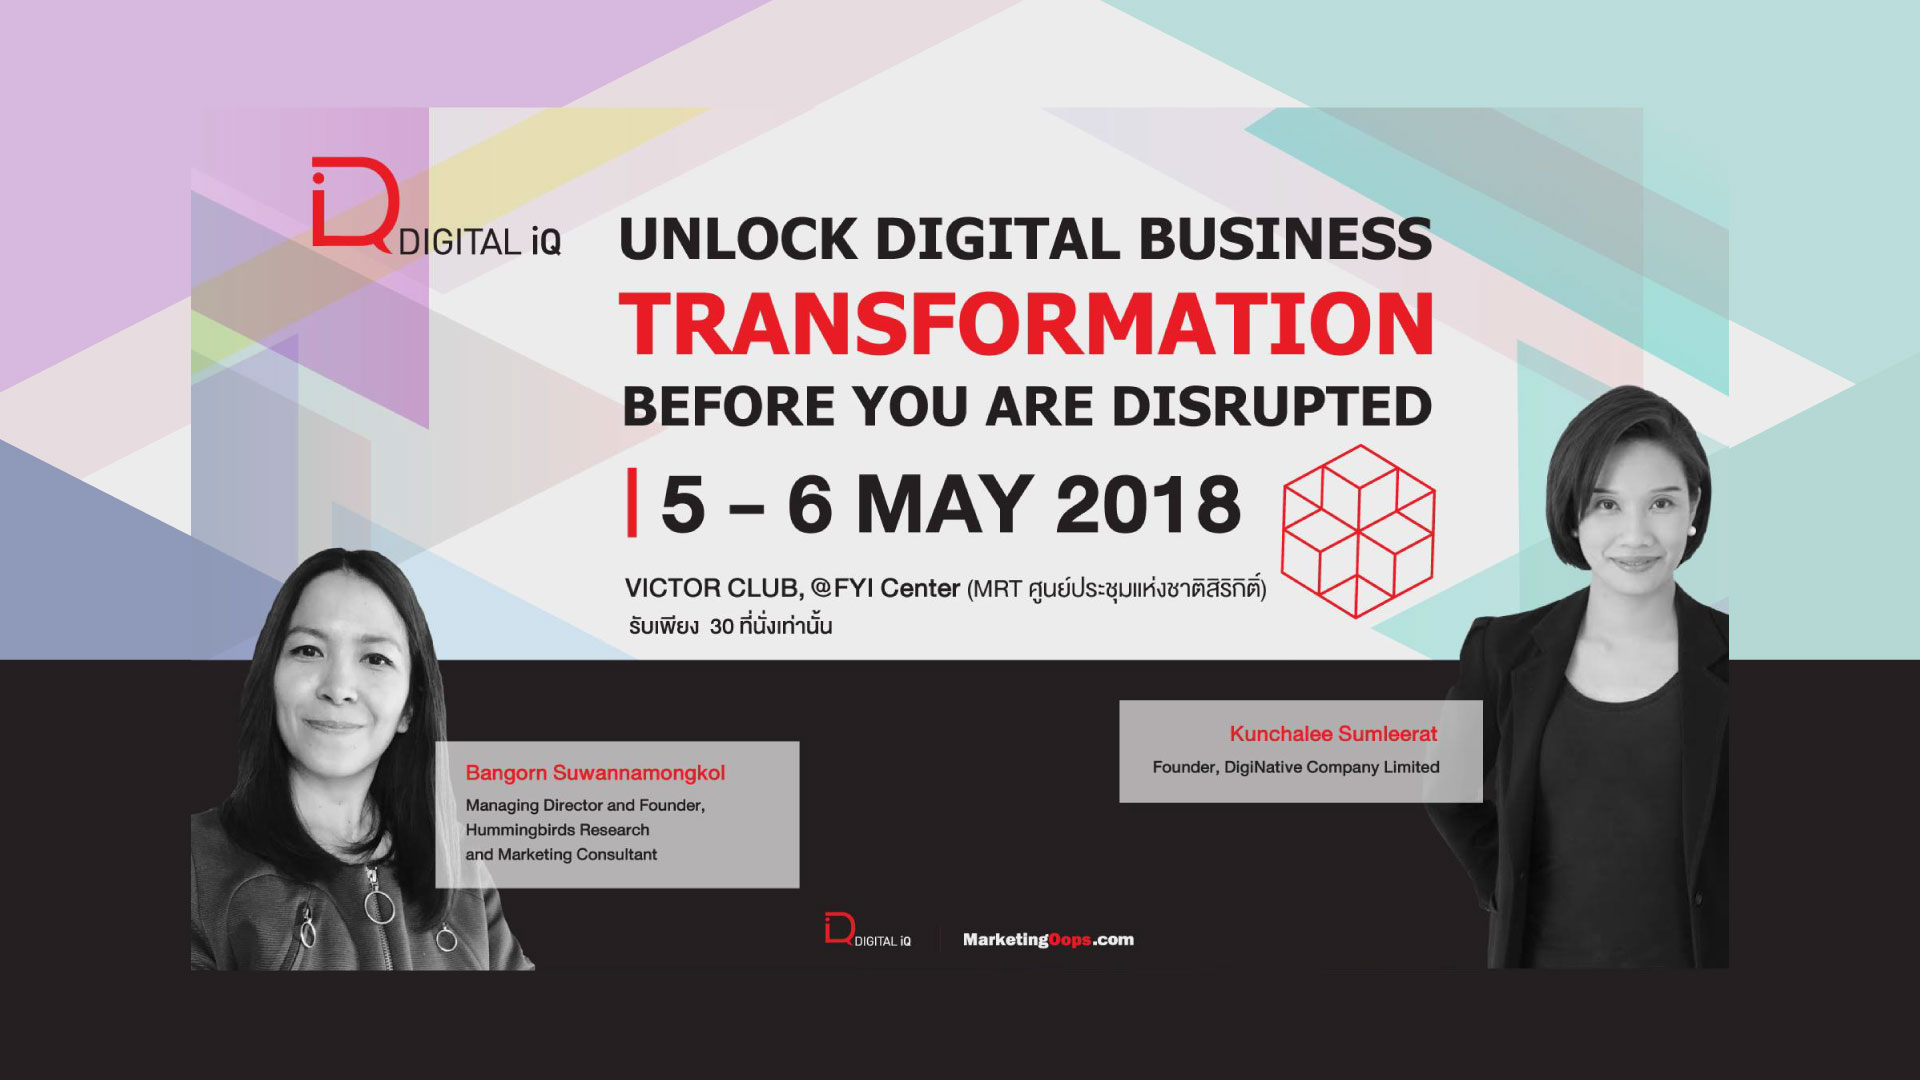 UNLOCK DIGITAL BUSINESS TRANSFORMATION BEFORE YOU ARE DISRUPTED